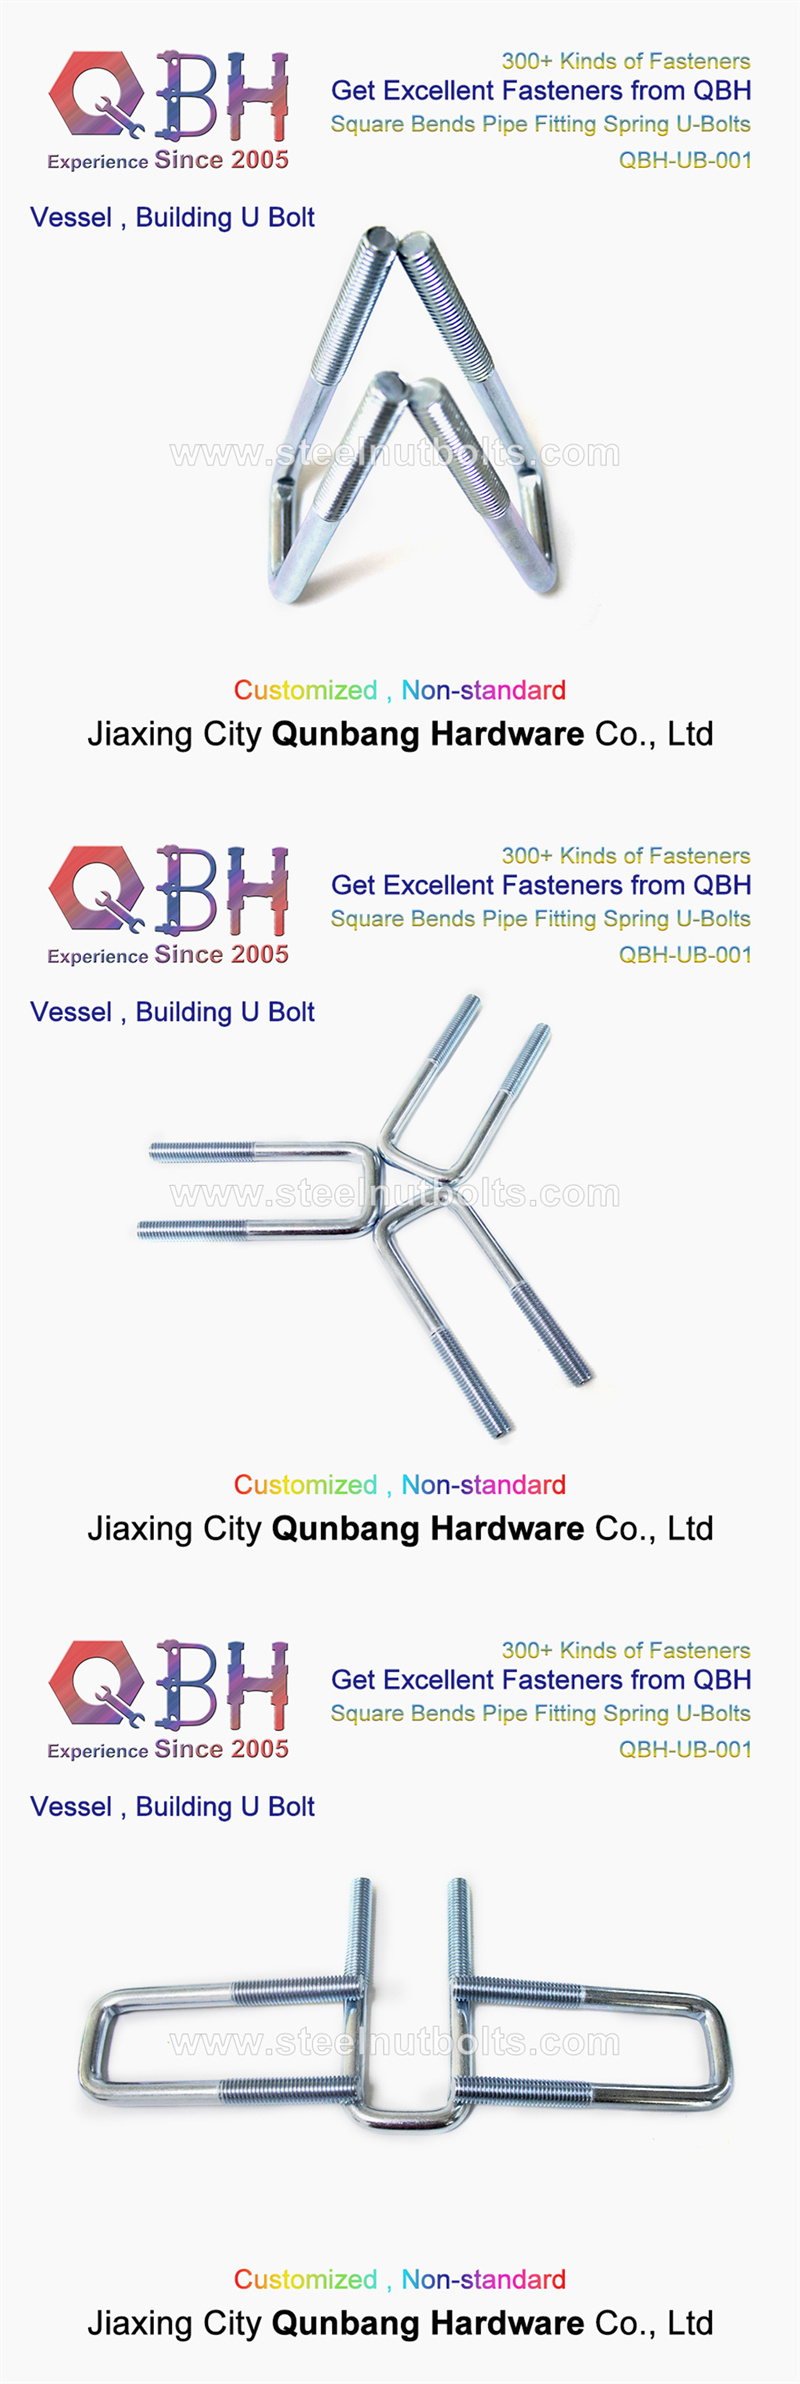 Qbh Steel Structure Steelwork Steel-Work OEM Standard ODM Customized Ship Pipework Supporting Square Round Bend U Bolt